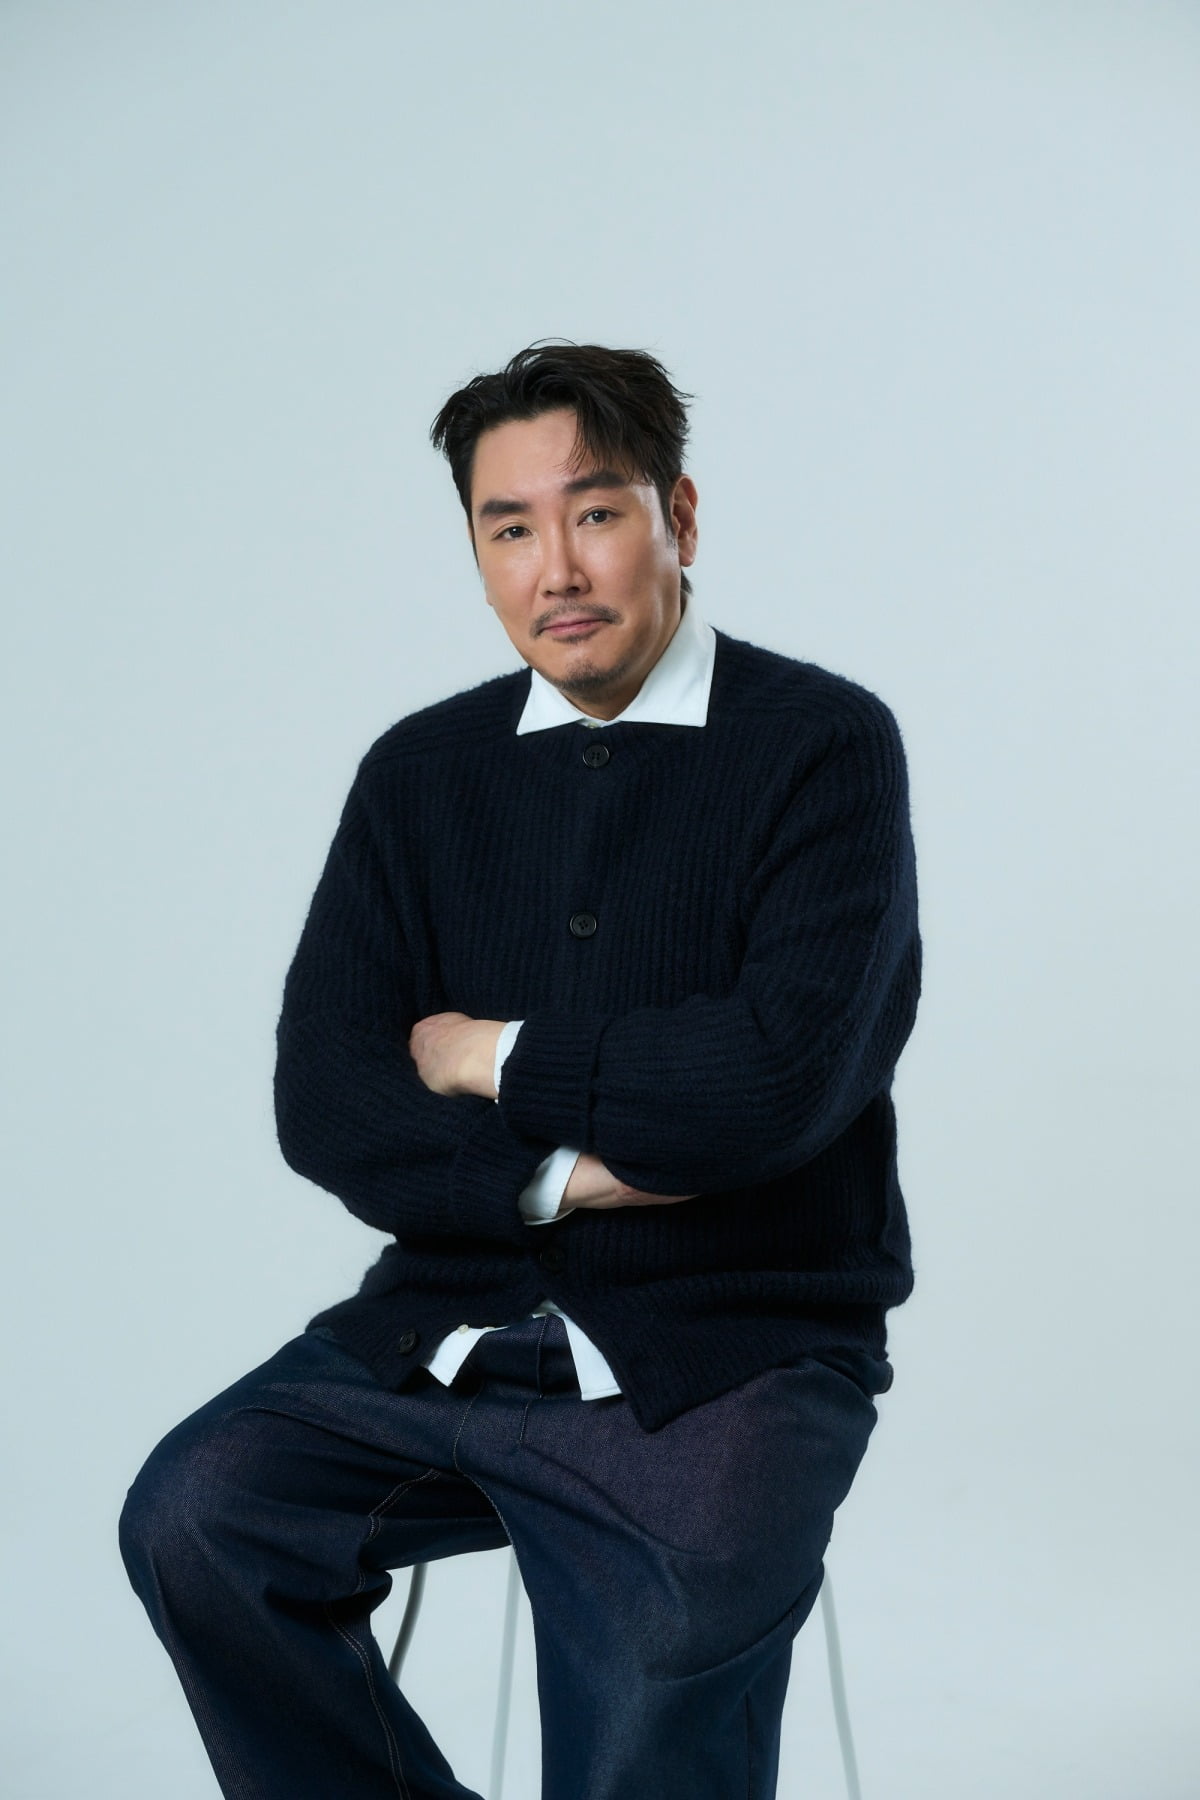 '21 years since debut' Cho Jin-woong's excessive humility: "I'm an actor who can't act... I imagine myself going to hell."